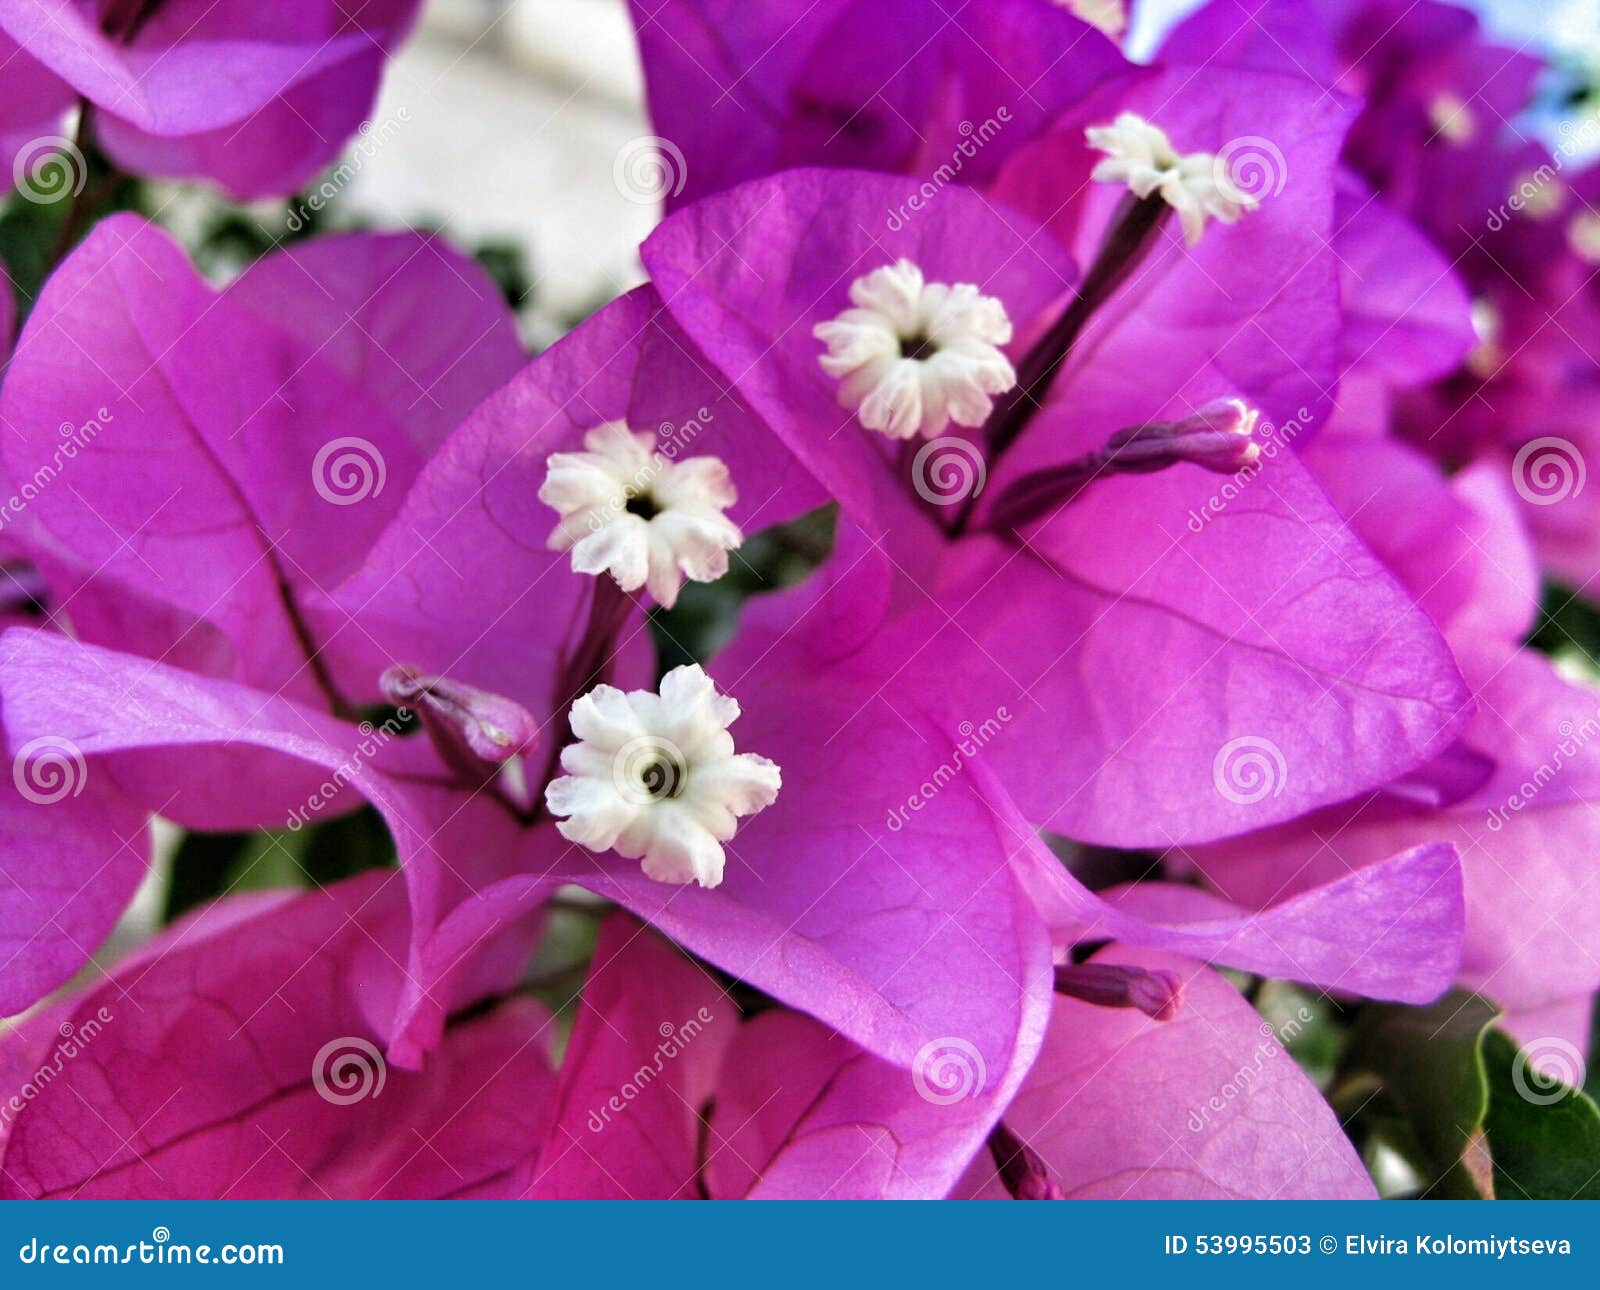 Pink flowers stock image. Image of glabra, pink, caryophyllales - 53995503